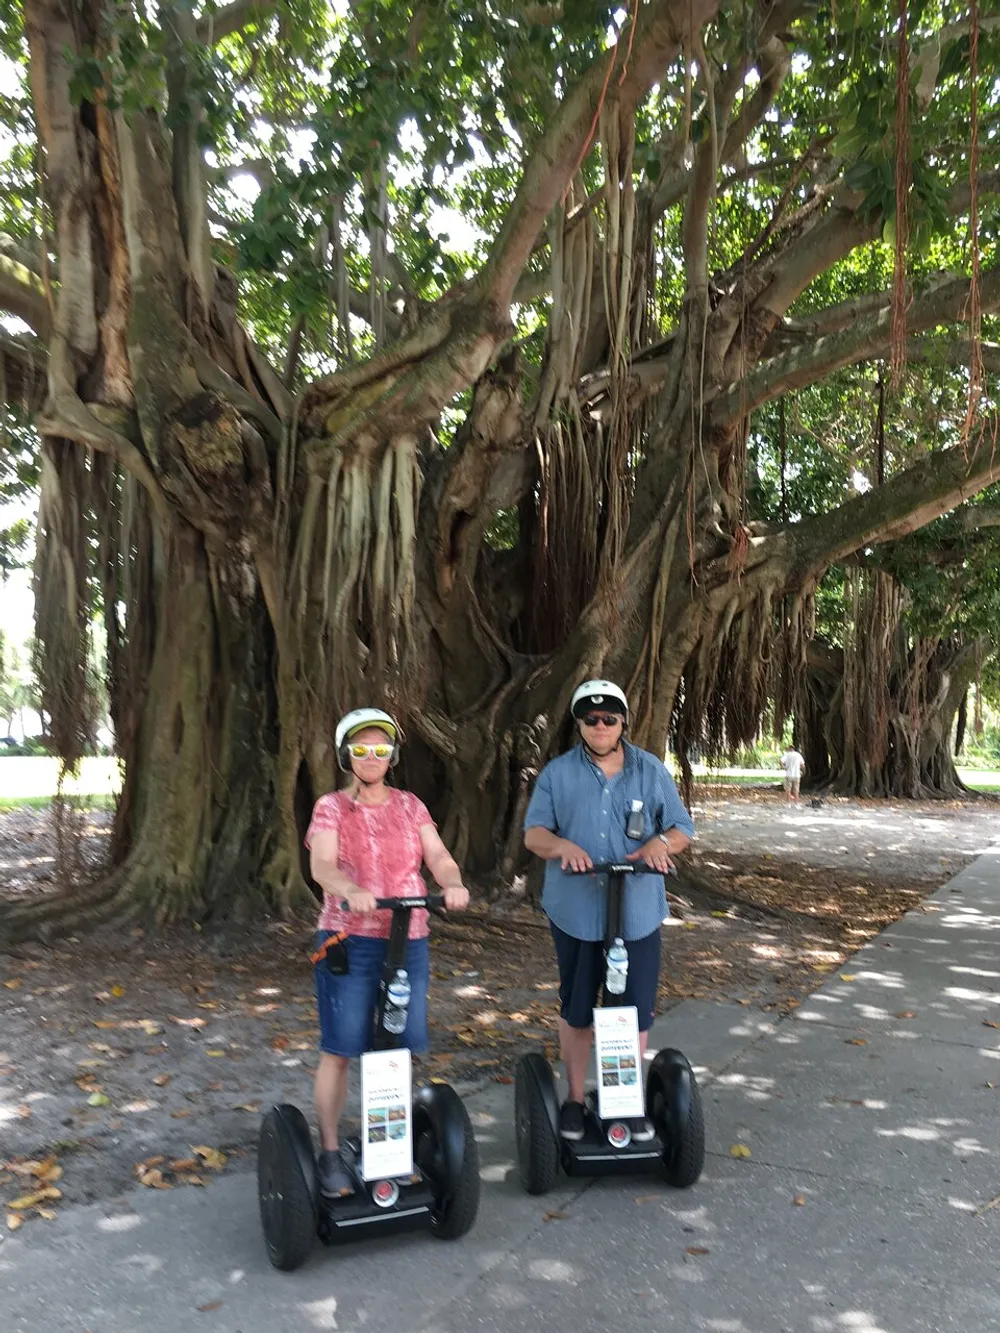 Two people wearing helmets are standing on Segways in front of a large banyan tree with complex root structures